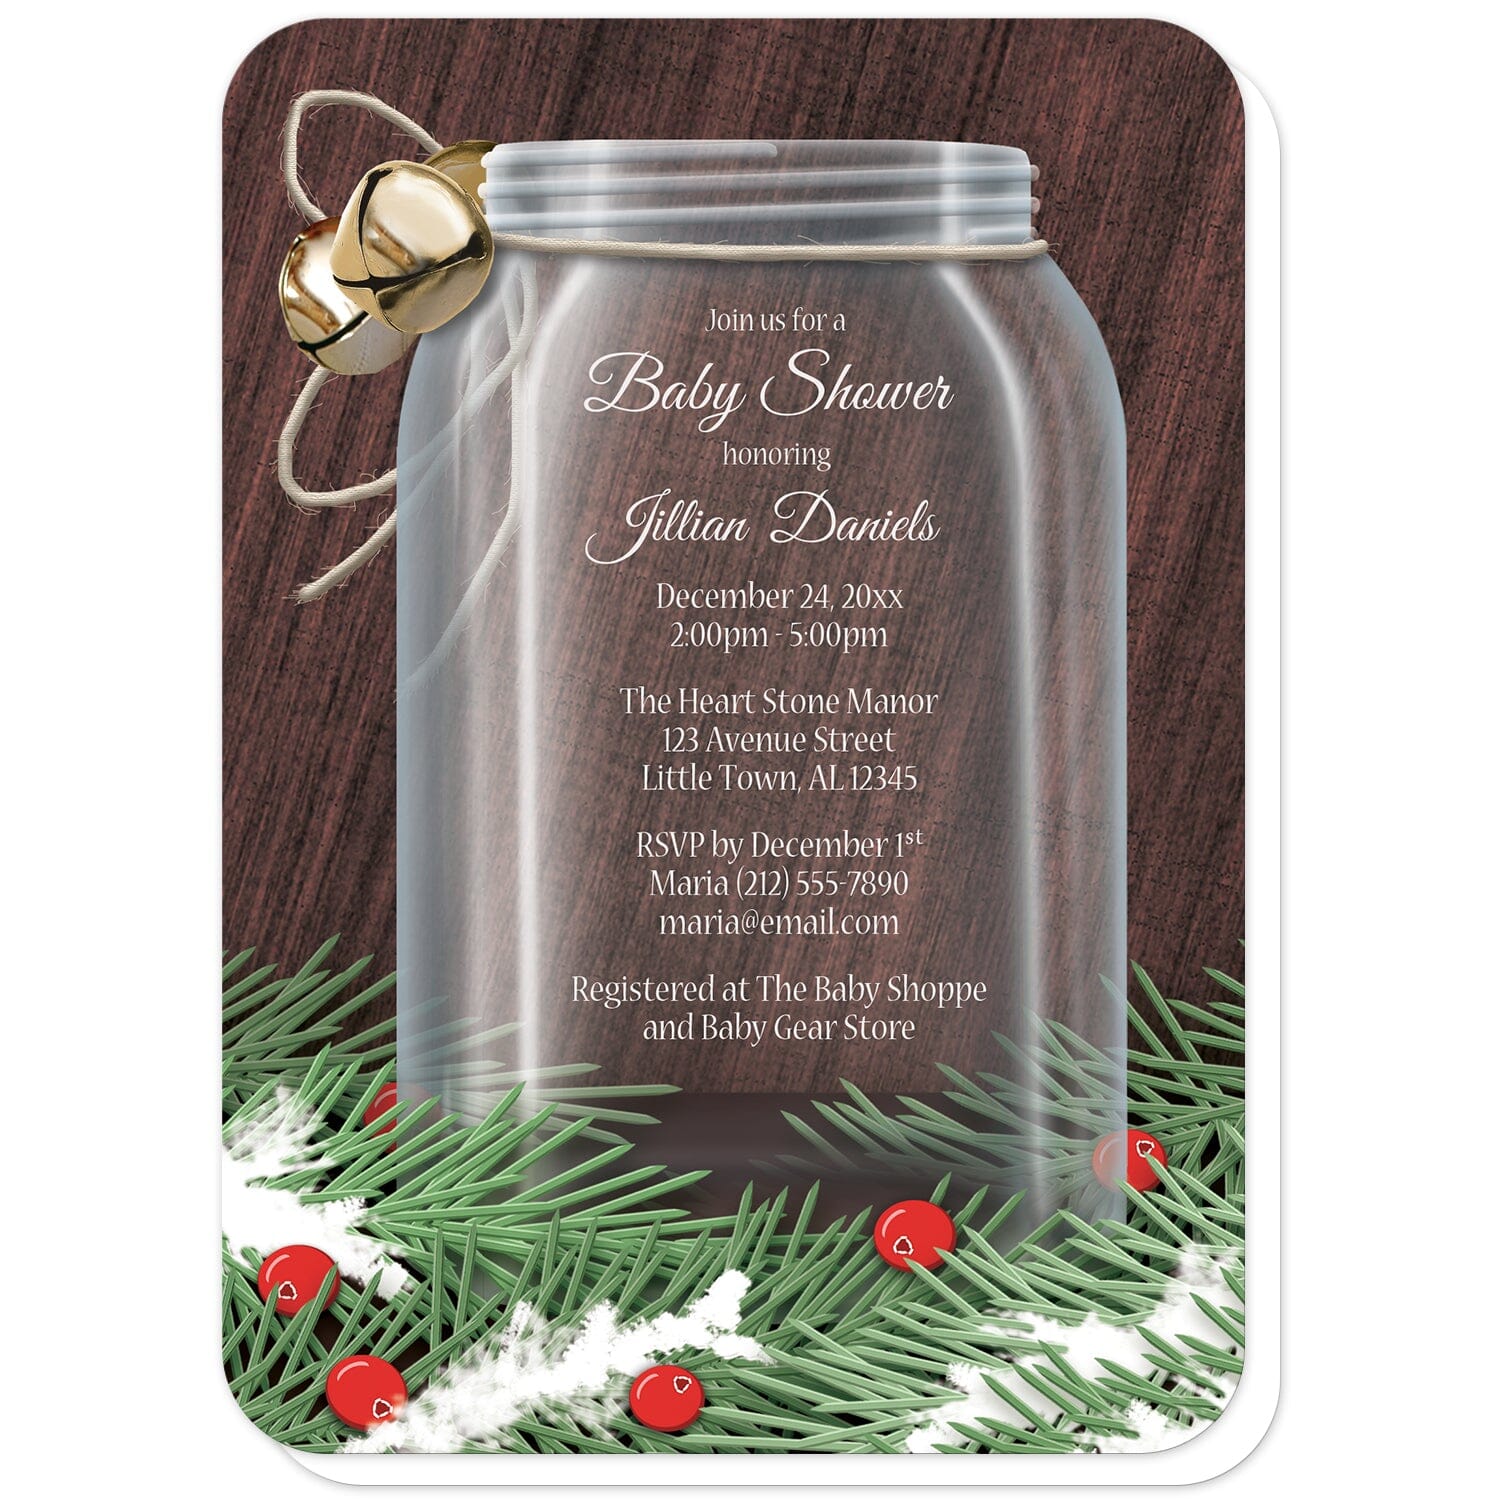 Winter Mason Jar Pine Boughs Baby Shower Invitations (with rounded corners) at Artistically Invited. Rustic holiday-themed winter mason jar pine boughs baby shower invitations designed with a glass mason jar illustration with twine and jingle bells tied around the top of the jar and pine boughs and cranberries along the bottom over a dark wood design. Your personalized baby shower celebration details are custom printed in white over the mason jar area of the design.